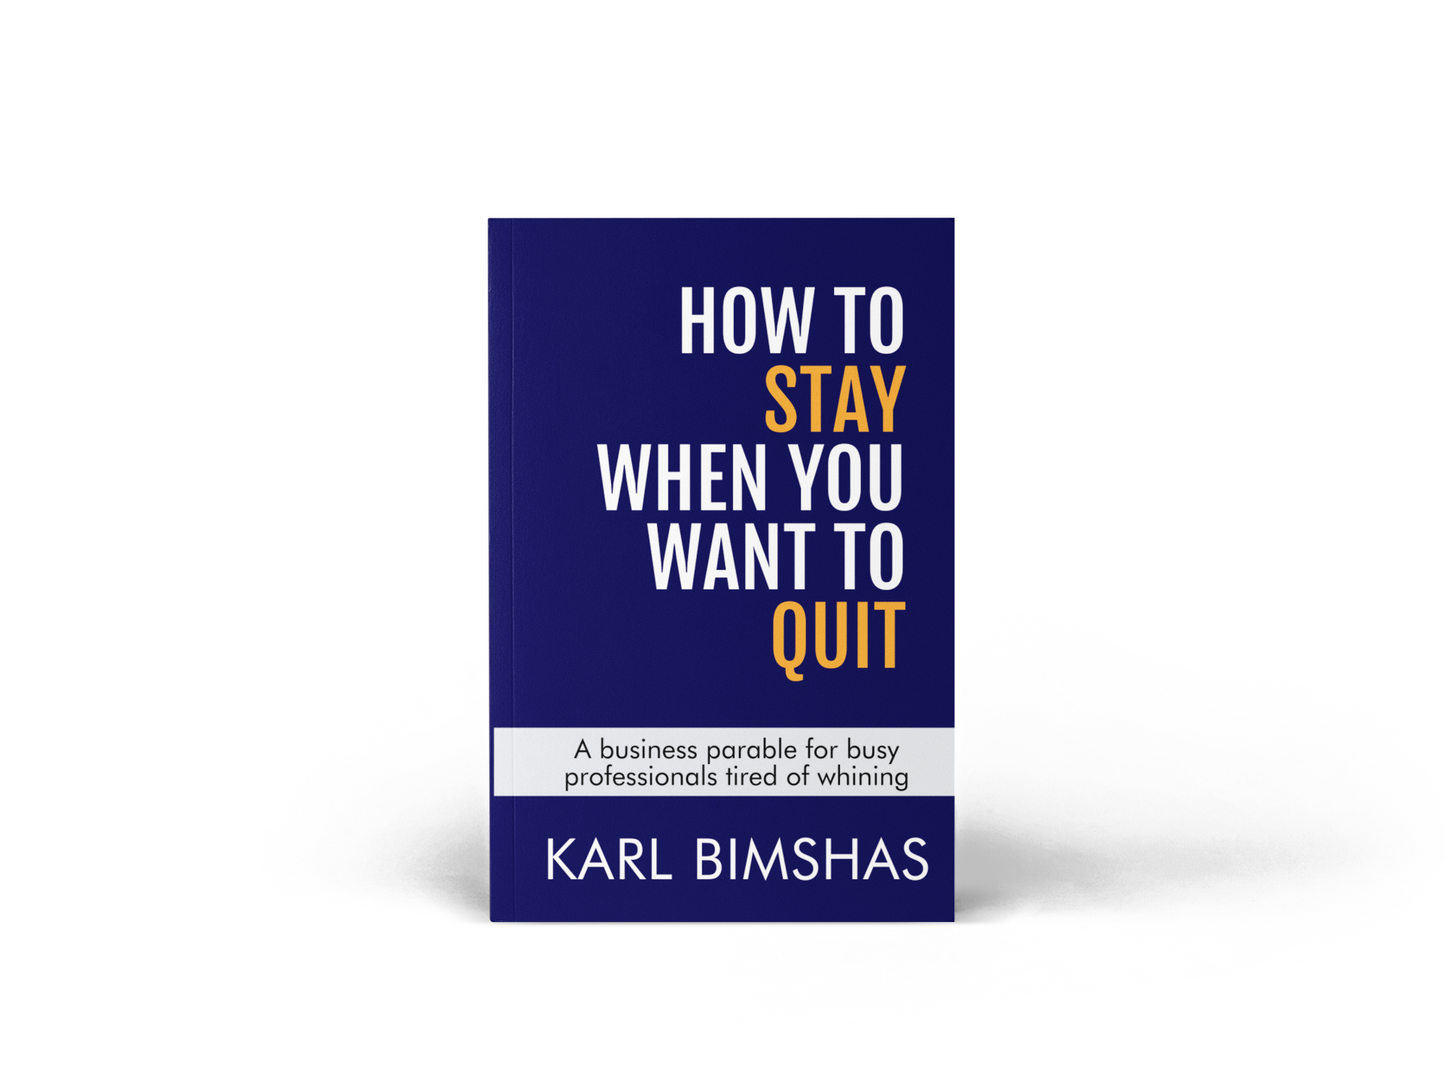 How to Stay When You Want to Quit